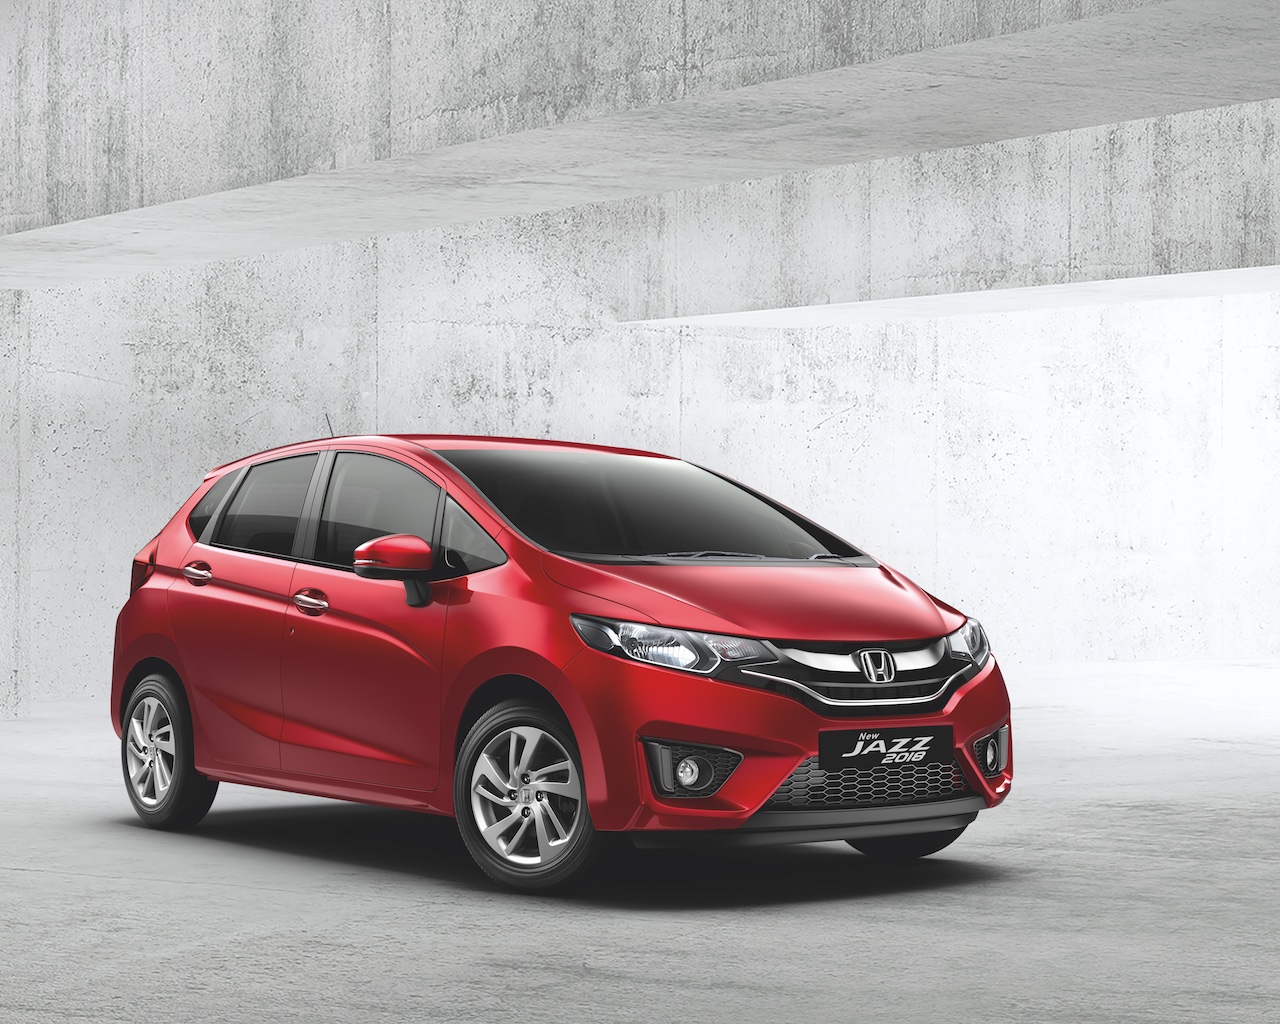 2018 Honda Jazz launched in India, priced from INR 7.35 lakh